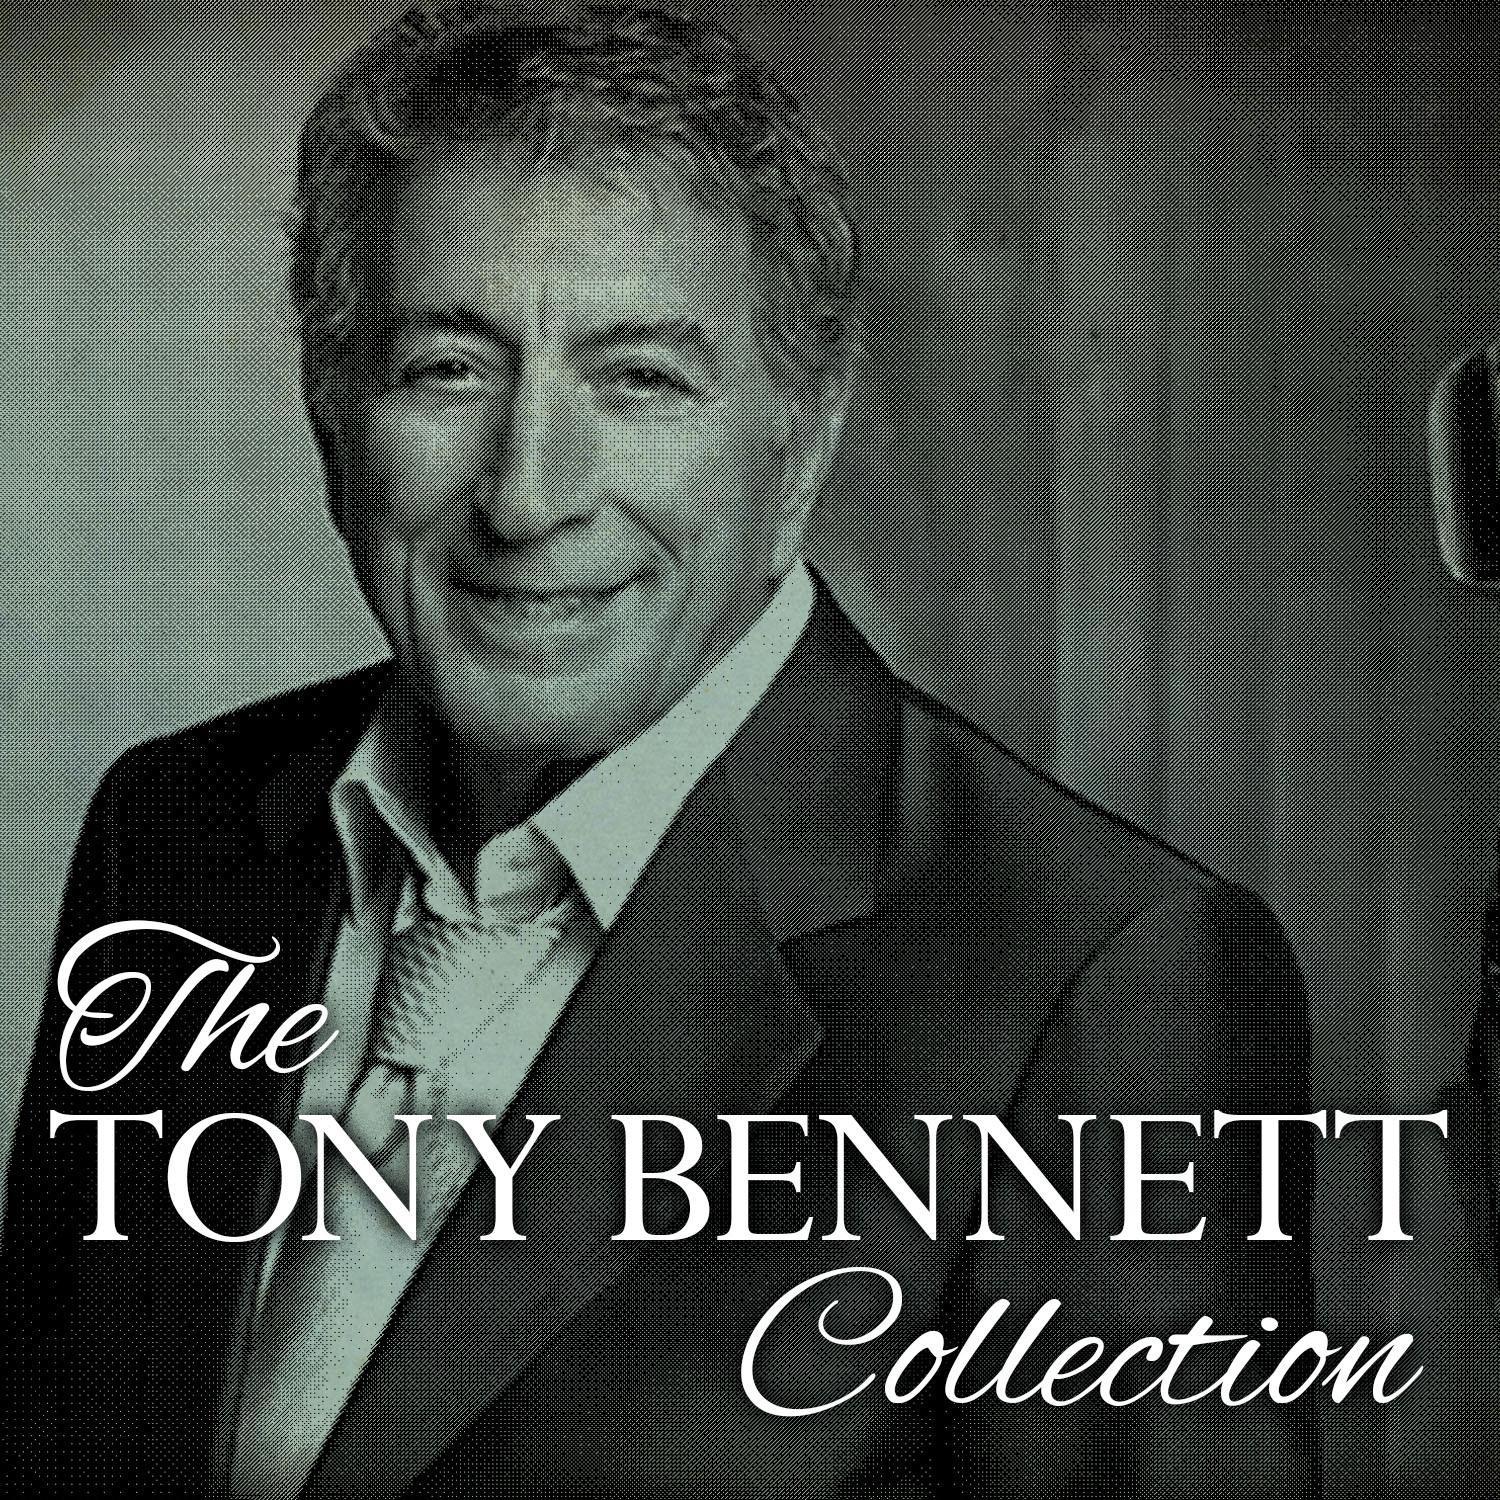 The Tony Bennett Collection